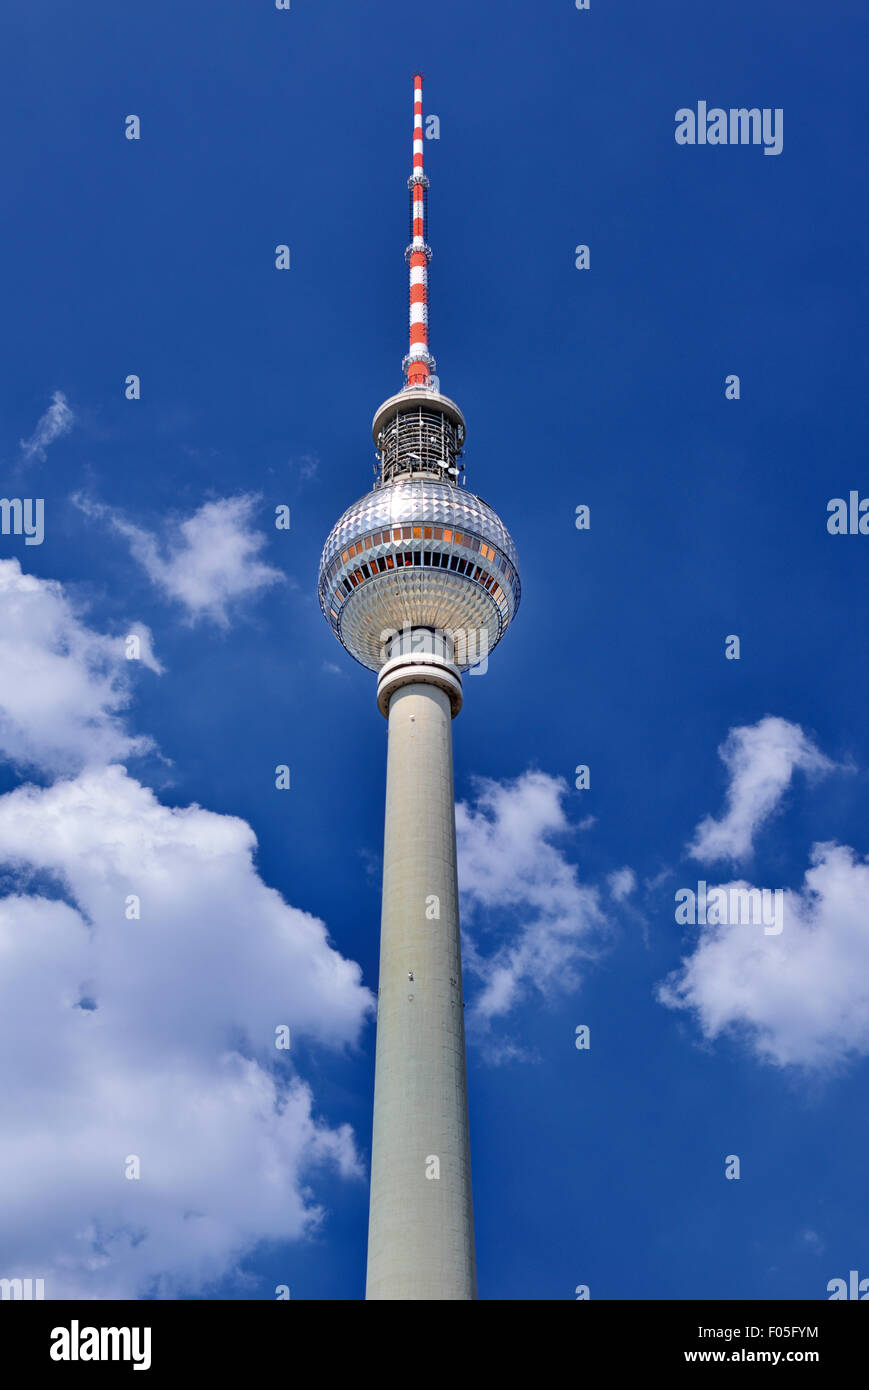 Germany, Berlin: TV Tower of Berlin with baby blue sky and fair weather clouds in the background Stock Photo